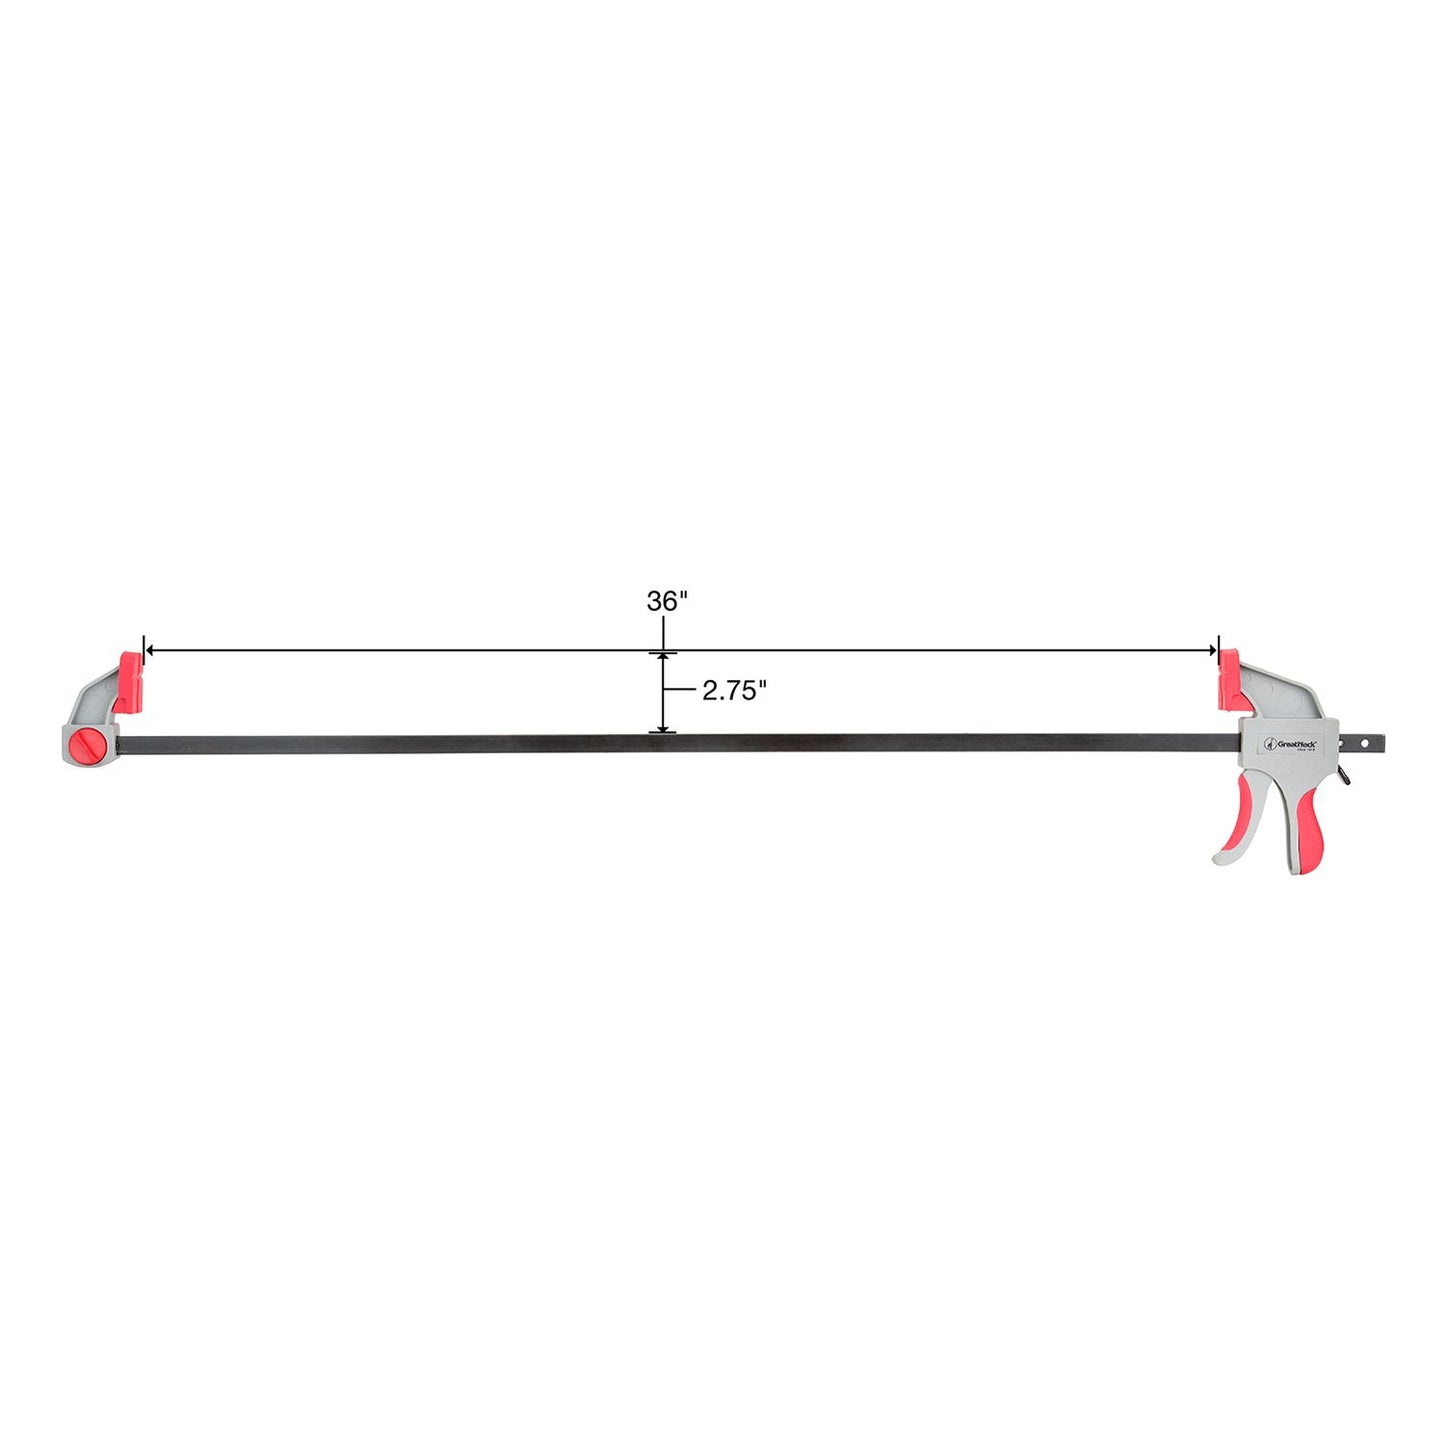 GreatNeck 59005 Inch Ratcheting Bar Clamp